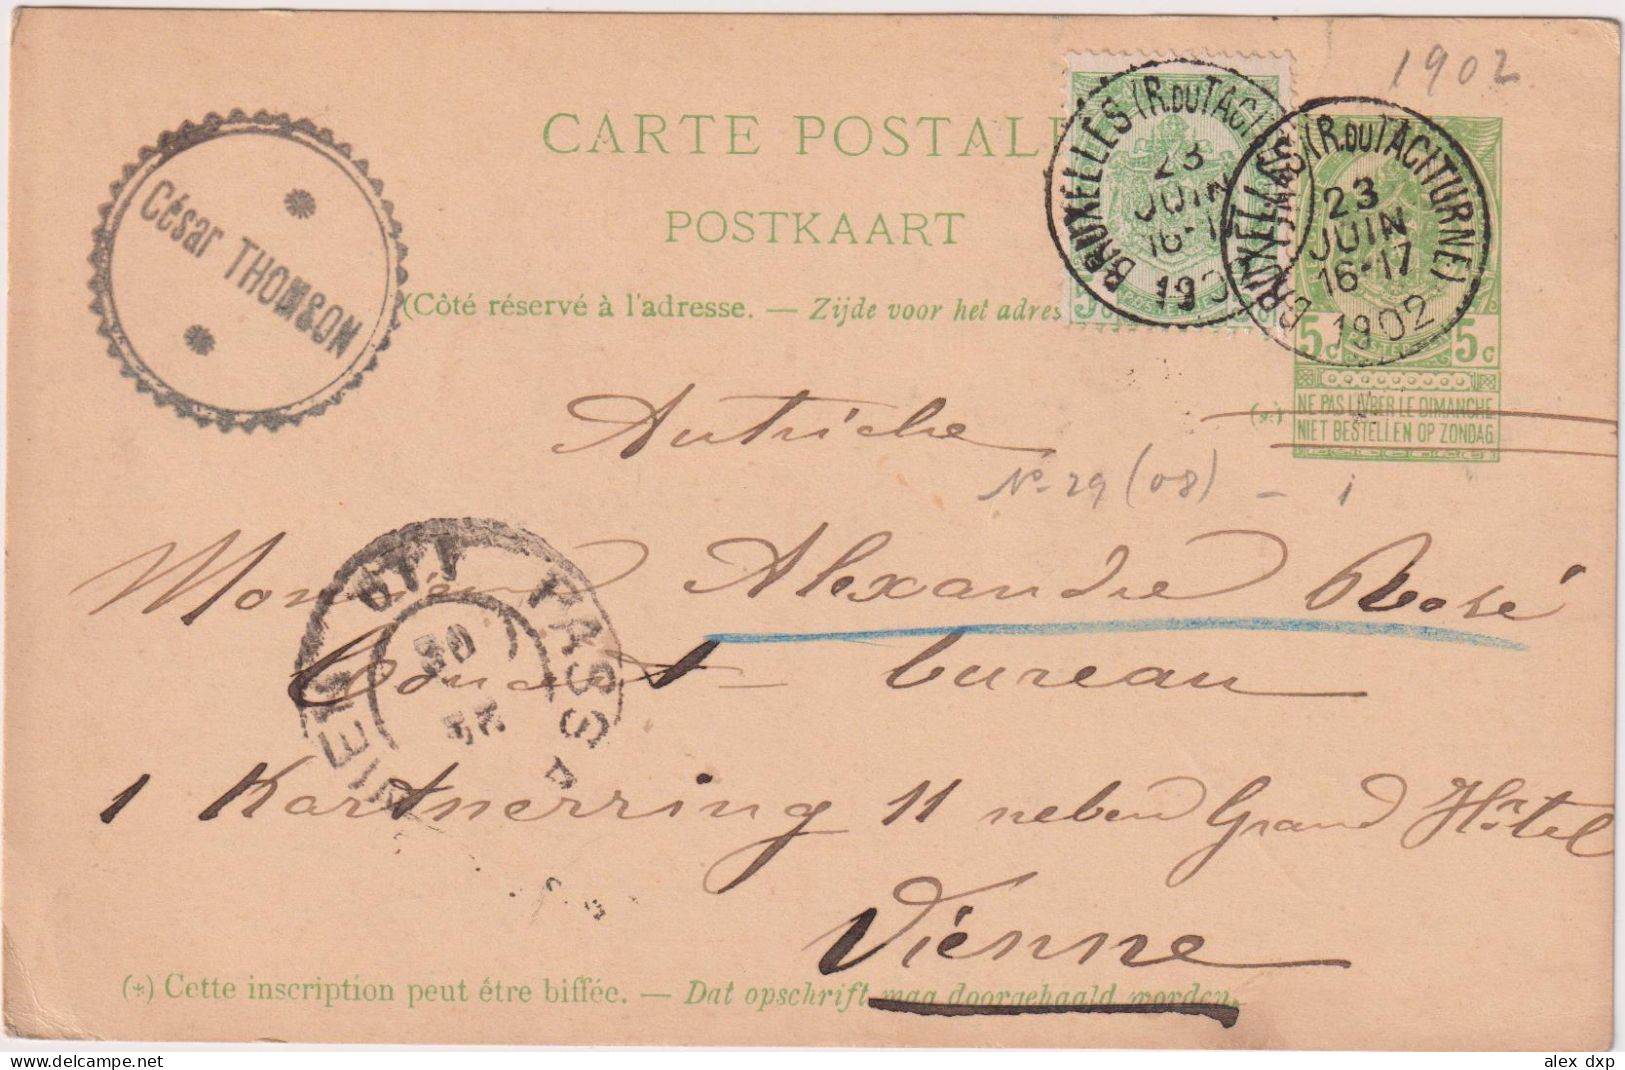 BELGIUM > 1902 POSTAL HISTORY > Stationary Card From Bruxelles To Vienne, Austria - 1893-1907 Coat Of Arms